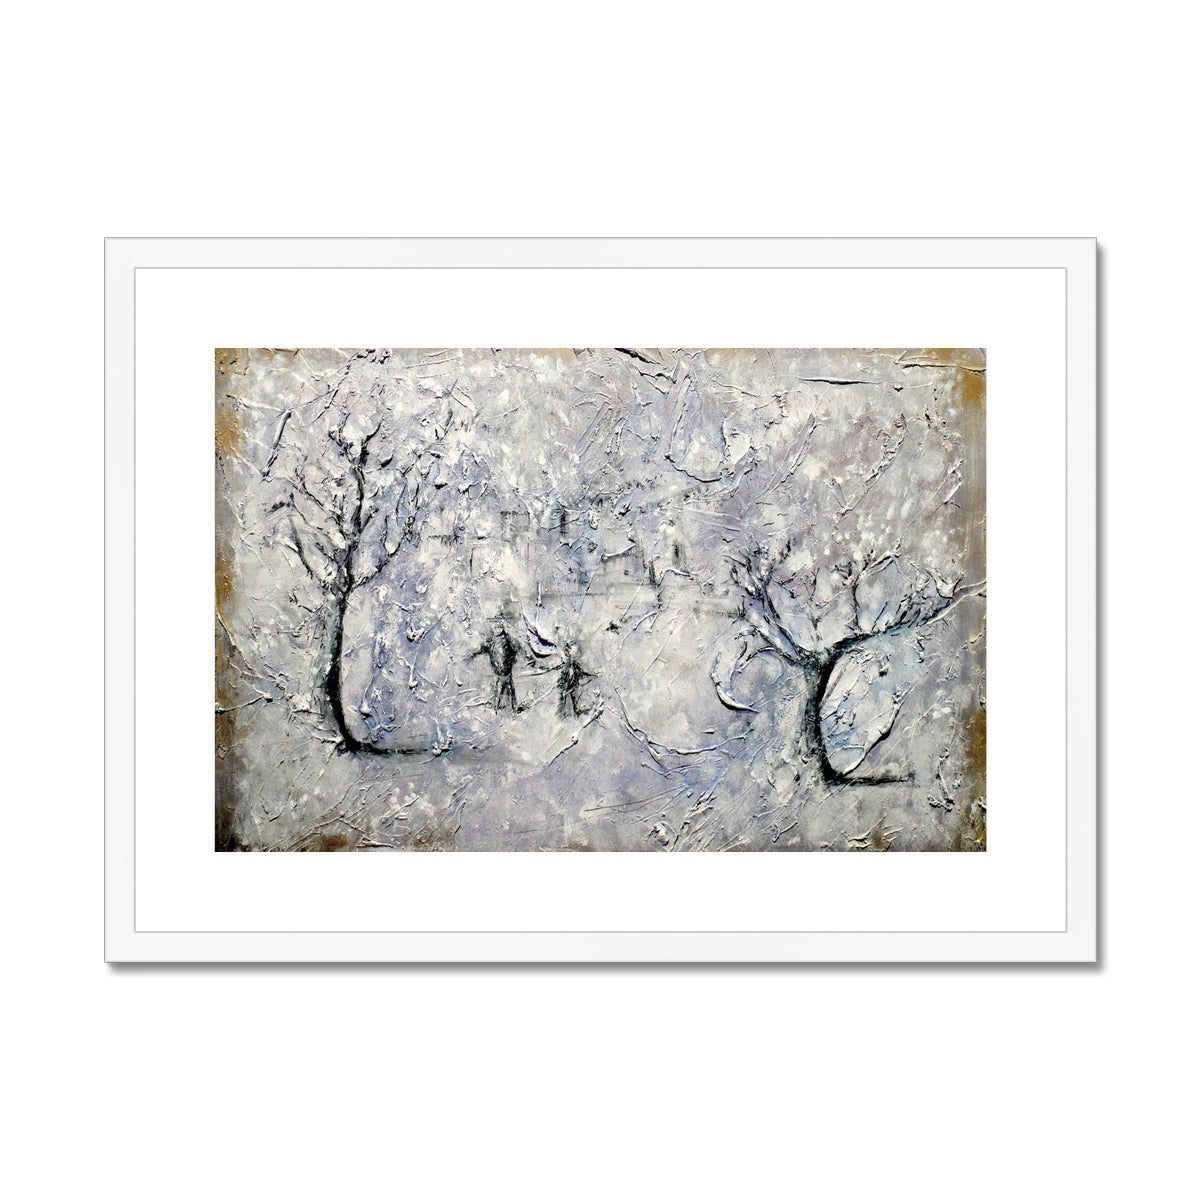 Father Daughter Snow Painting | Framed & Mounted Prints From Scotland-Framed & Mounted Prints-Abstract & Impressionistic Art Gallery-A2 Landscape-White Frame-Paintings, Prints, Homeware, Art Gifts From Scotland By Scottish Artist Kevin Hunter